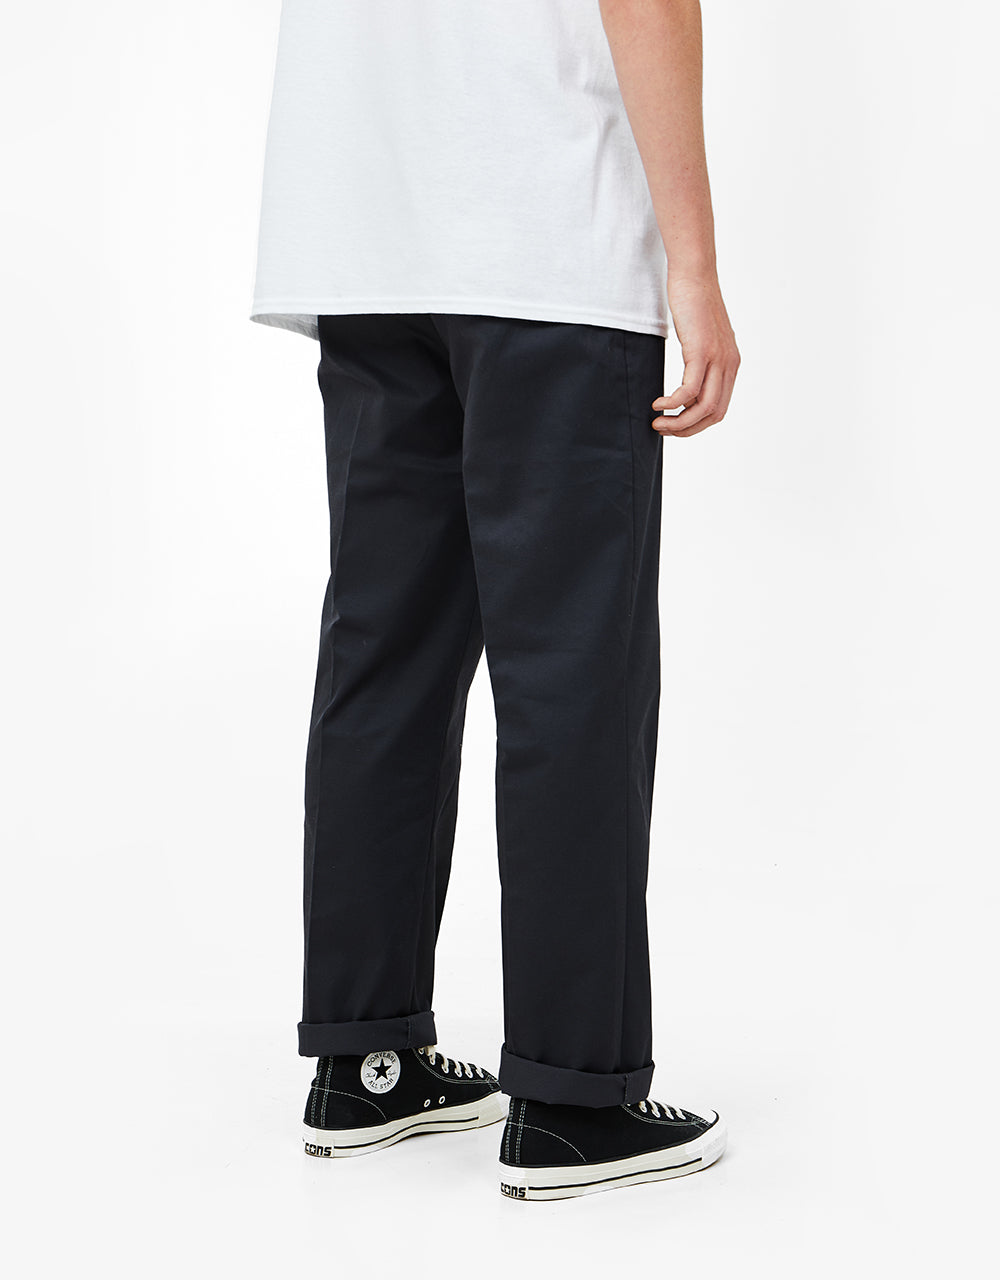 Route One Workpant - Charcoal